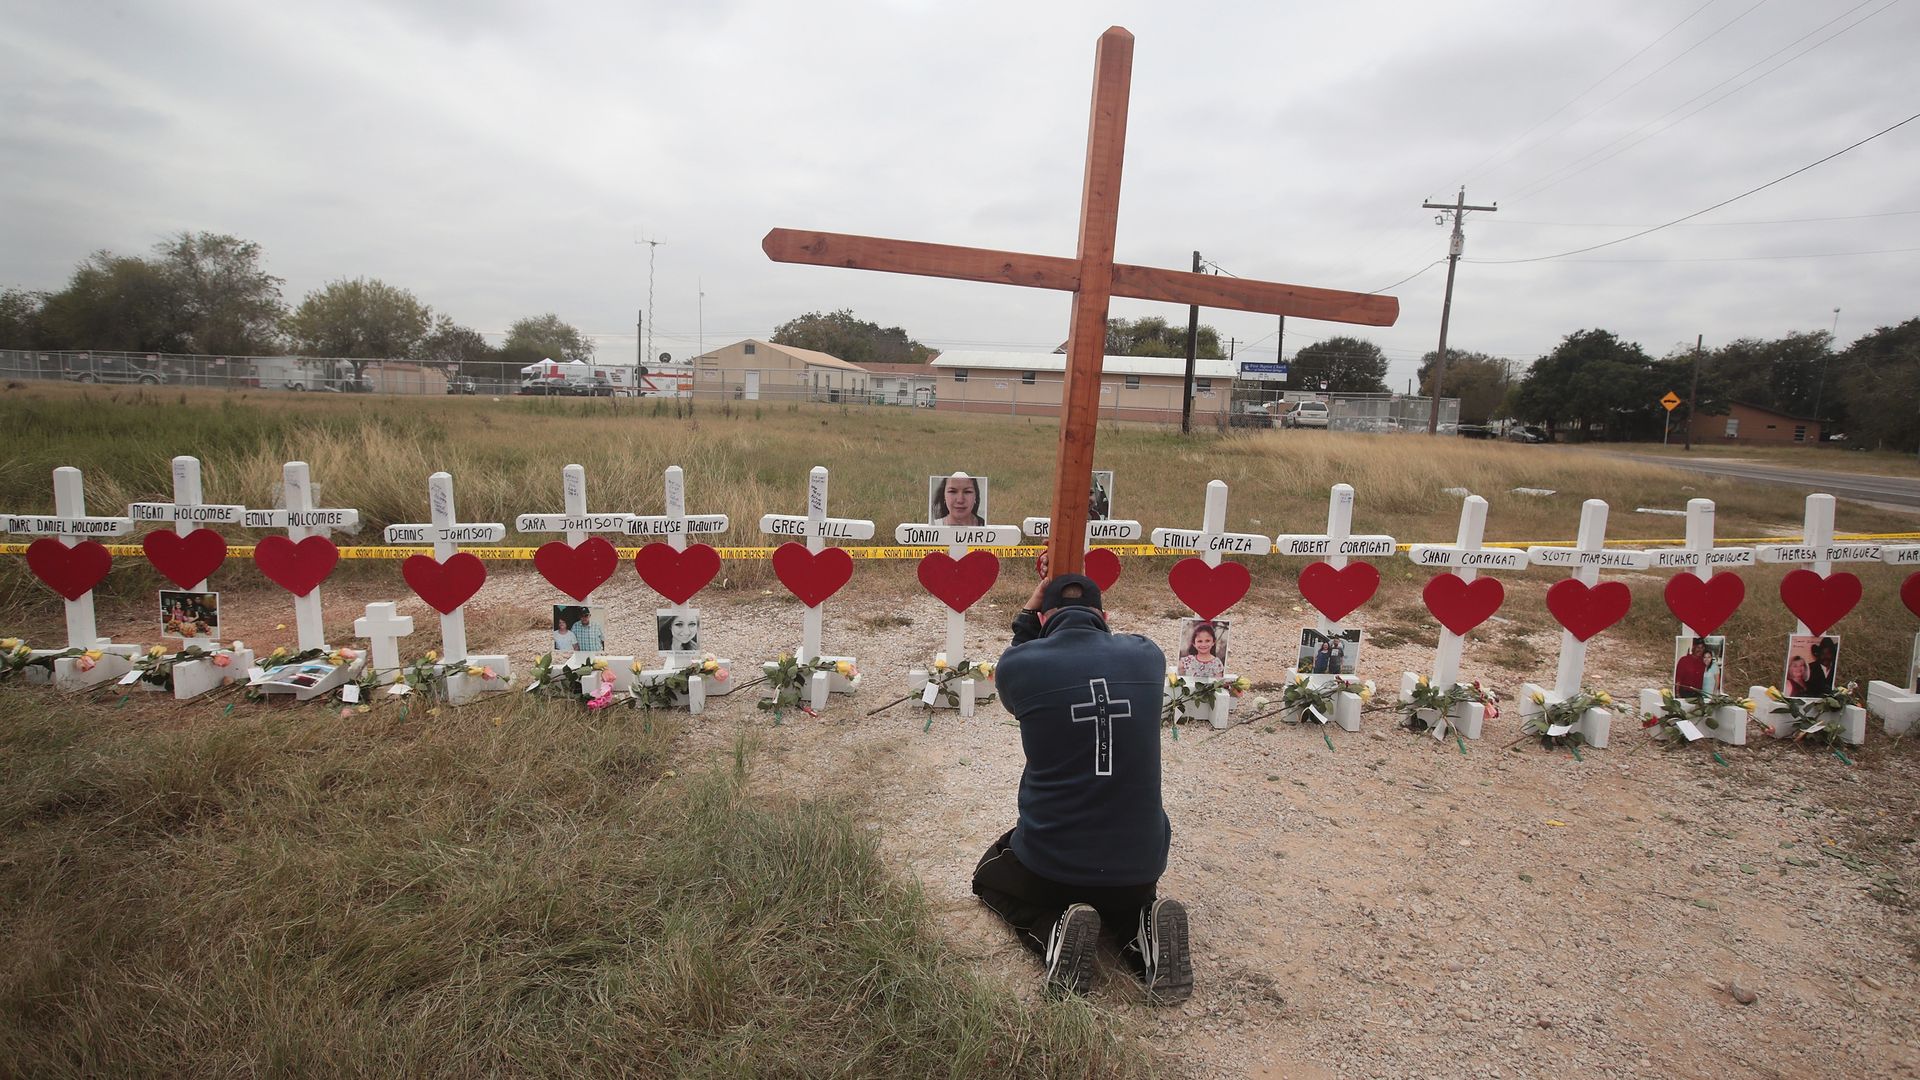 A man prays at a memorial where 26 crosses were placed to honor the 26 victims killed at the First Baptist Church of Sutherland Springs on November 9, 2017 in Sutherland Springs, Texas. 